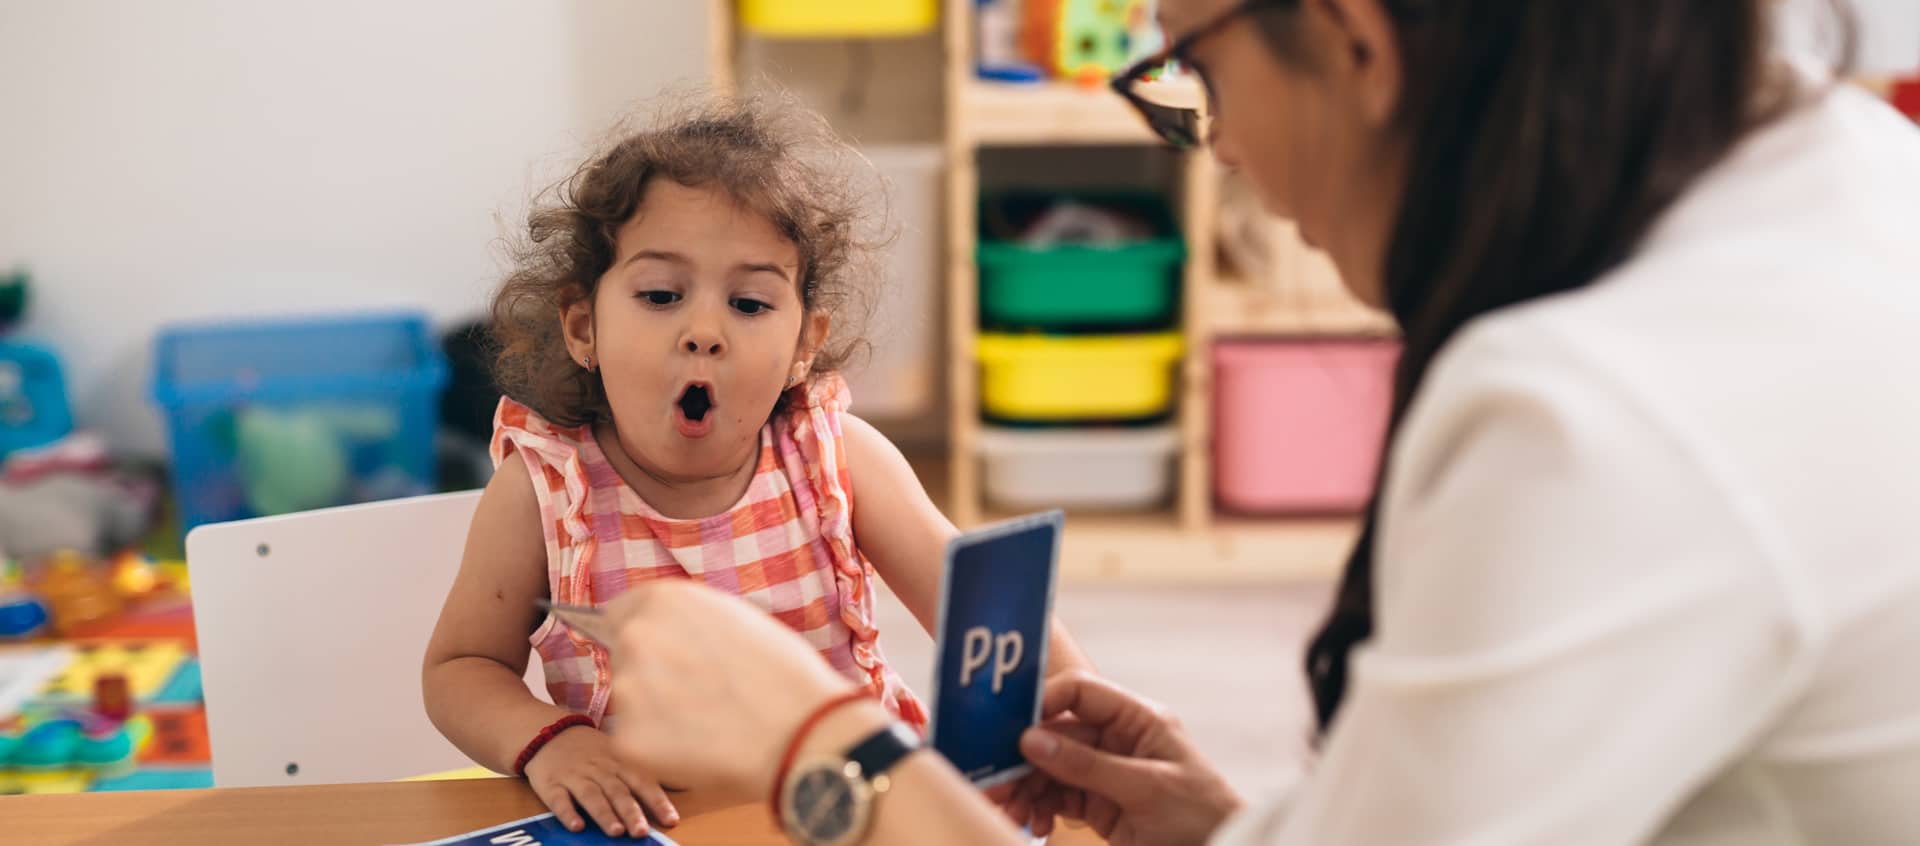 Speech therapy for kids